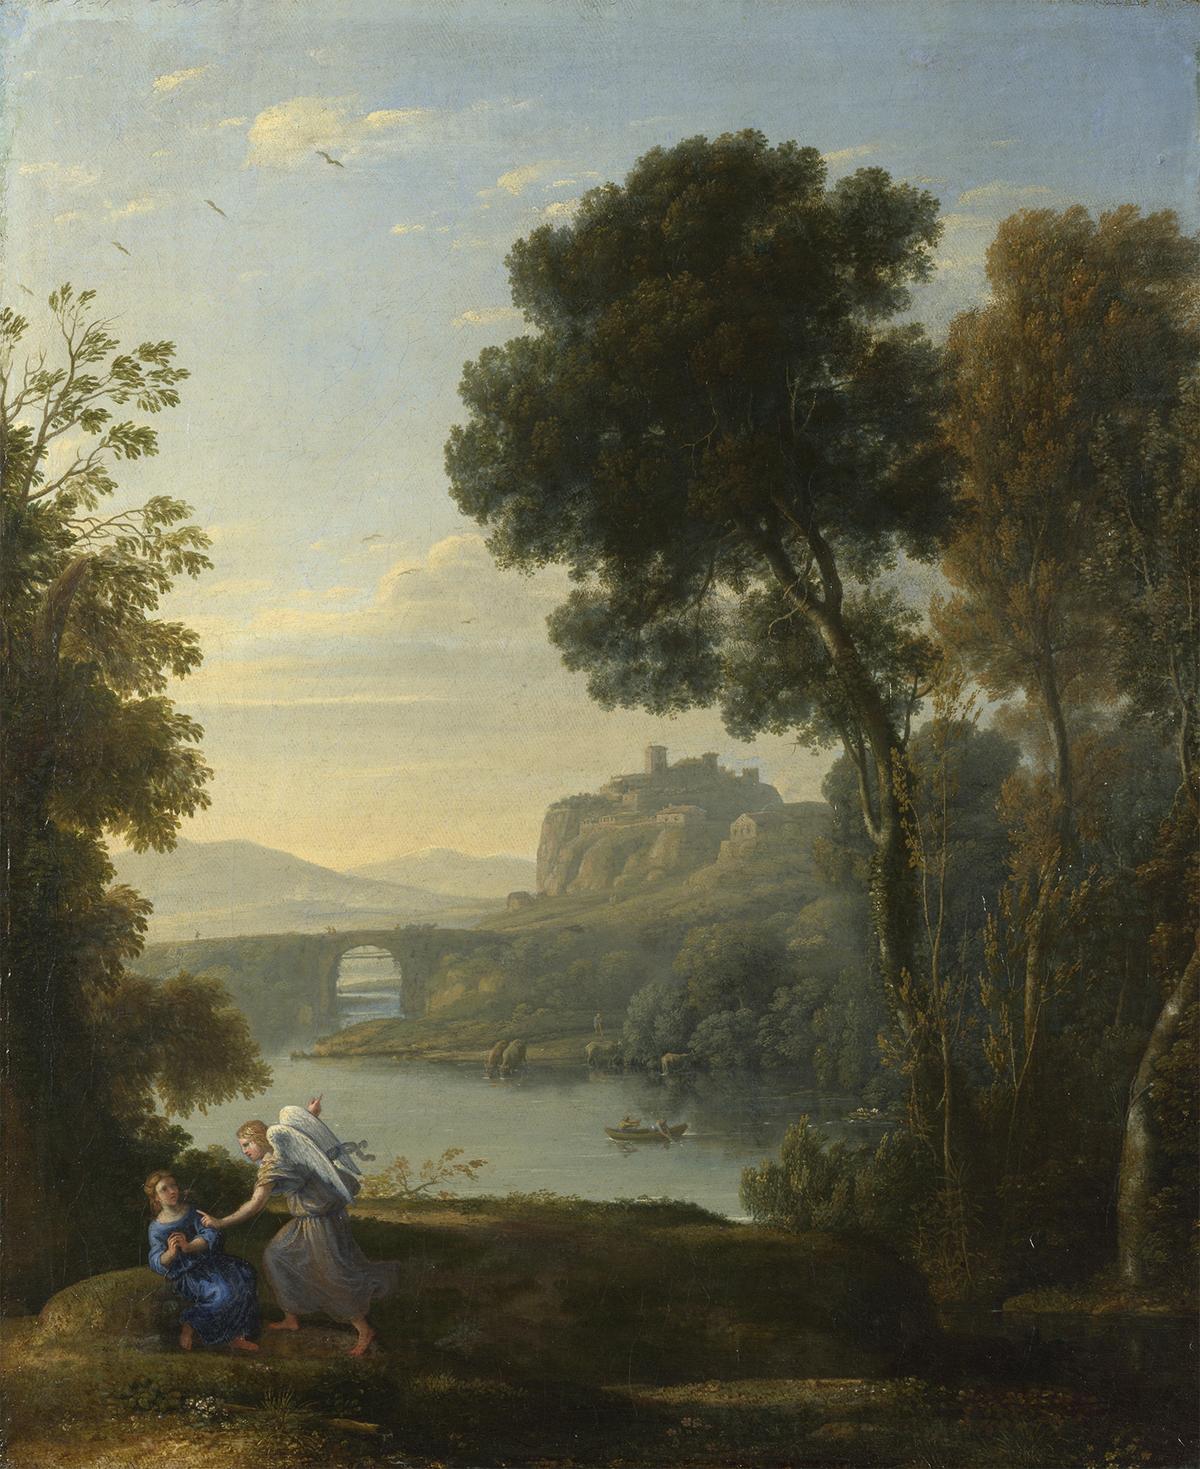 "Landscape With Hagar and the Angel," 1646, by Claude Lorrain. Oil on canvas; 20 1/2 inches by 16 1/2 inches. National Gallery, London. (Public Domain)